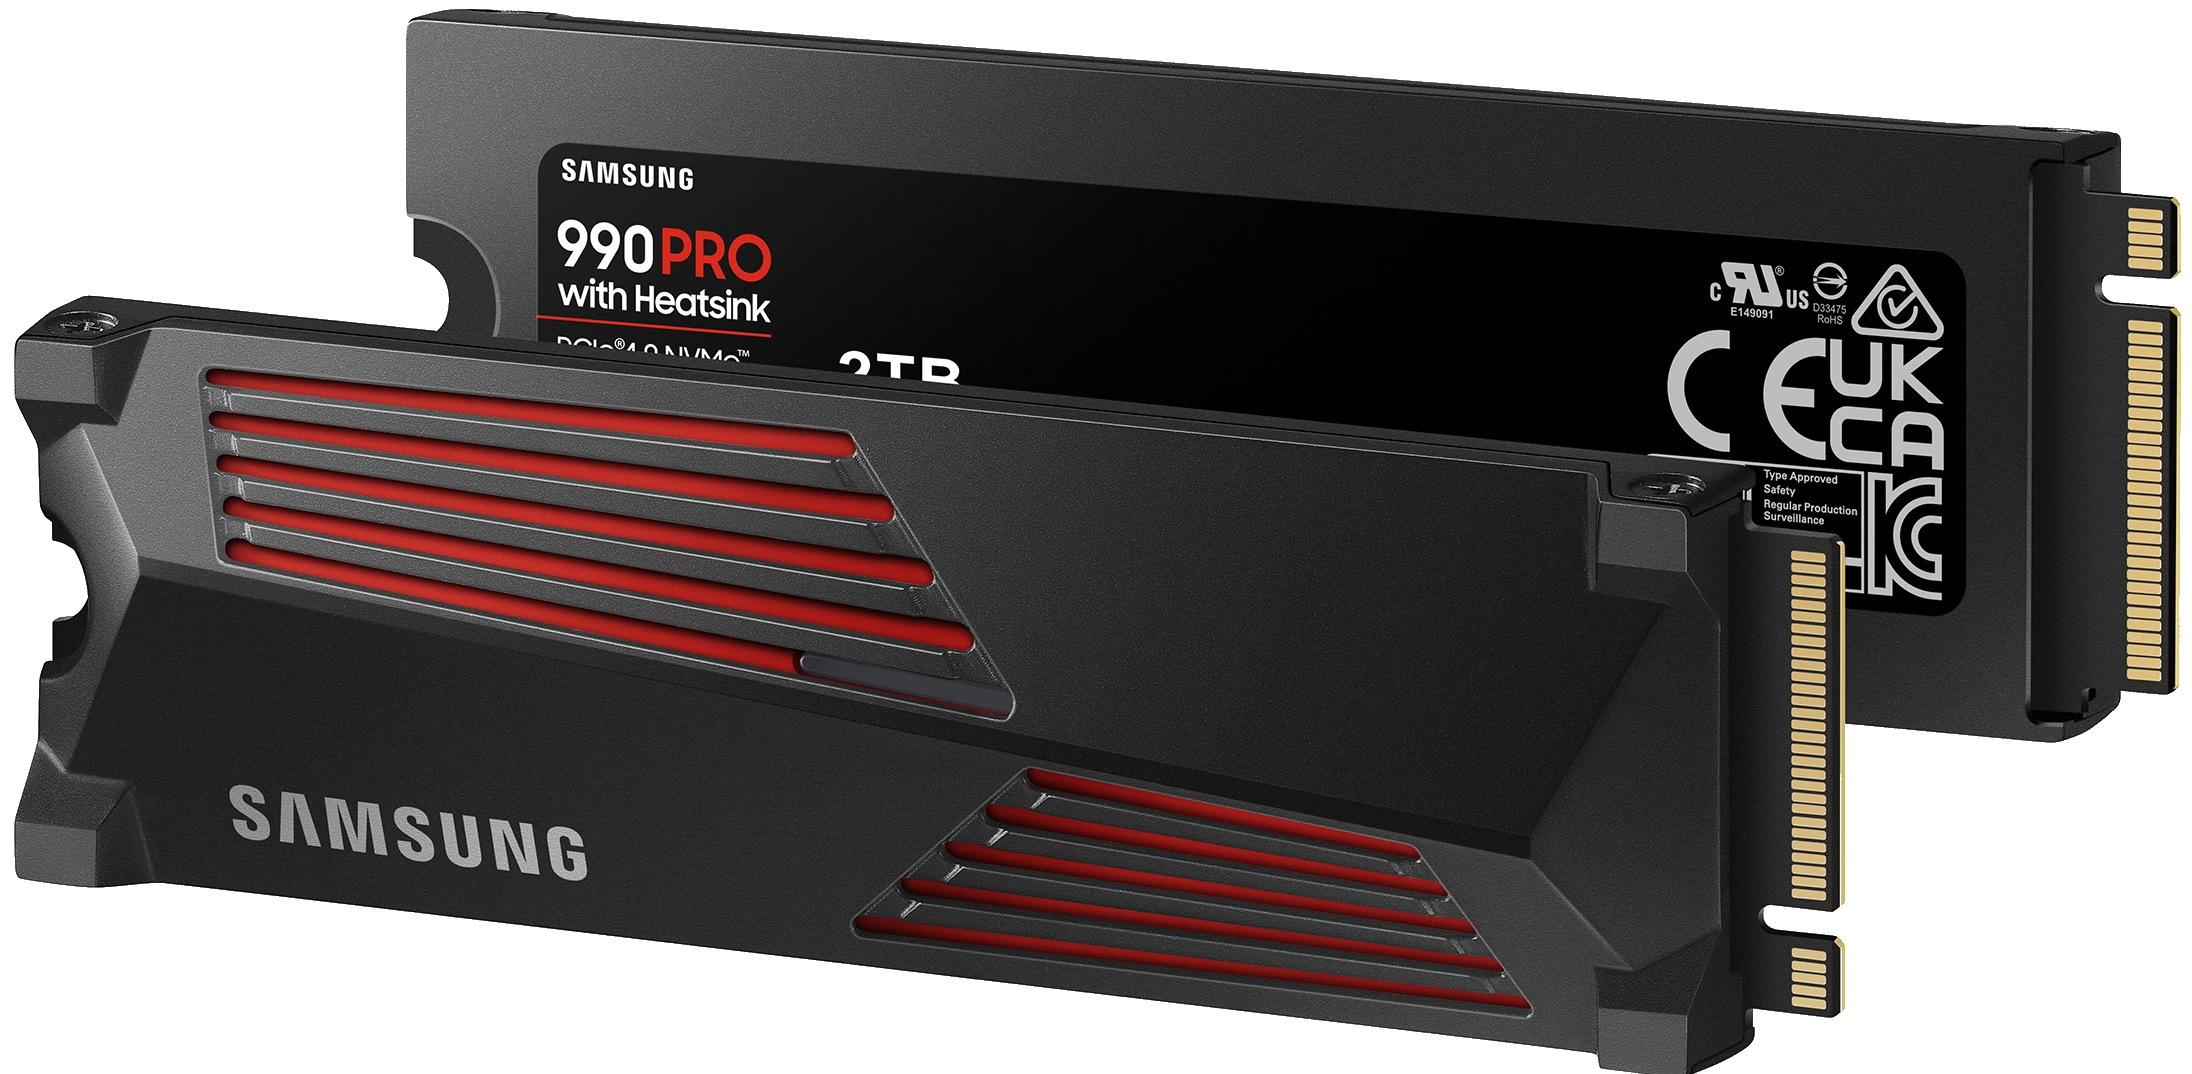 Samsung 990 Pro SSD Officially Revealed – Hardware Confirmed – NAS